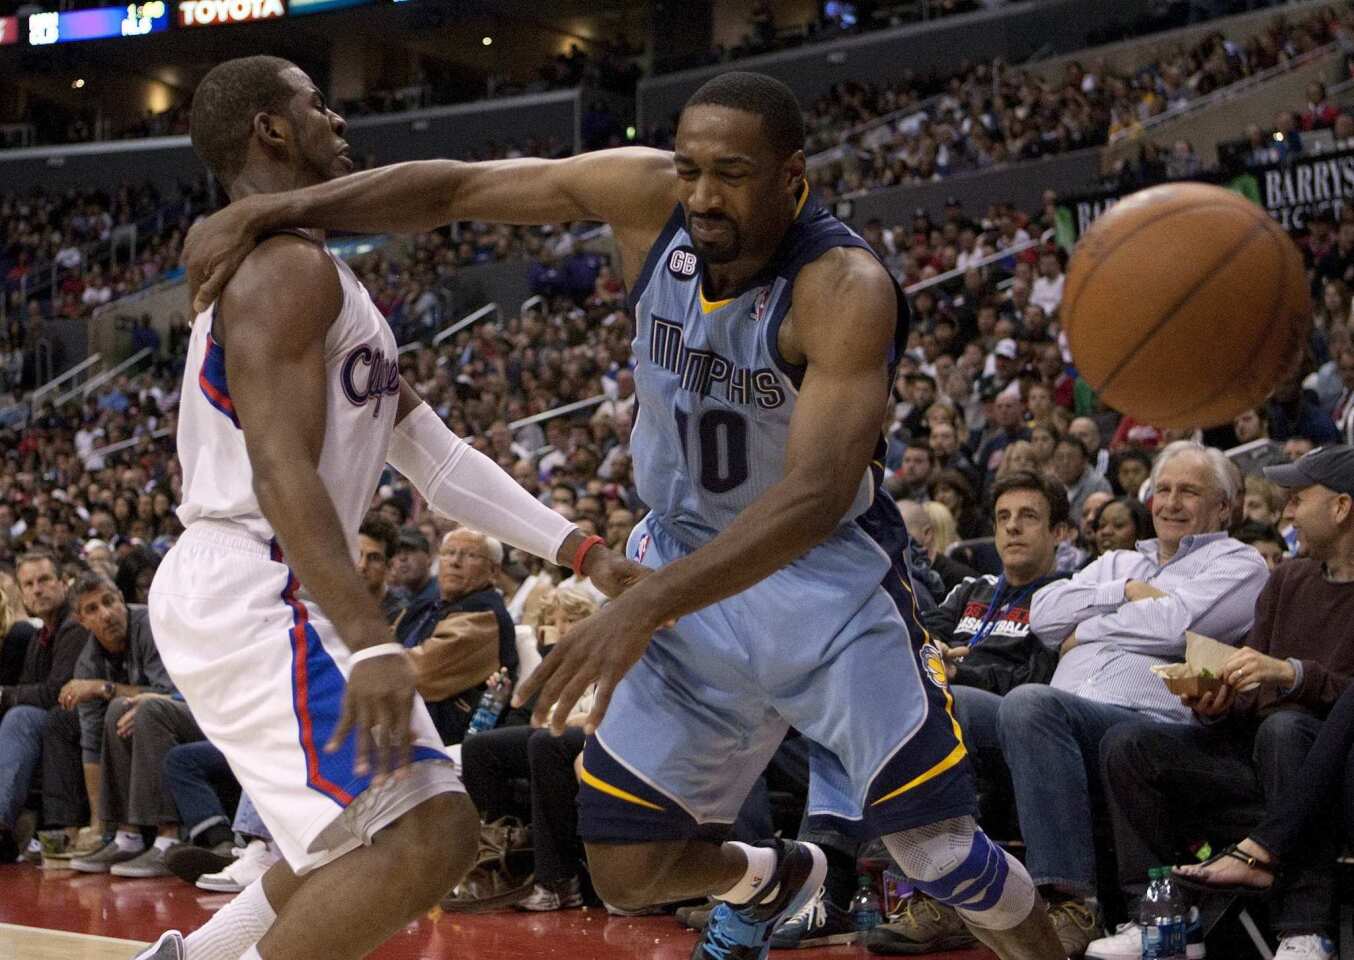 Clippers point guard Chris Paul forces Grizzlies guard Gilbert Arenas to lose the ball out of bounds in the second half Saturday afternoon at Staples Center.